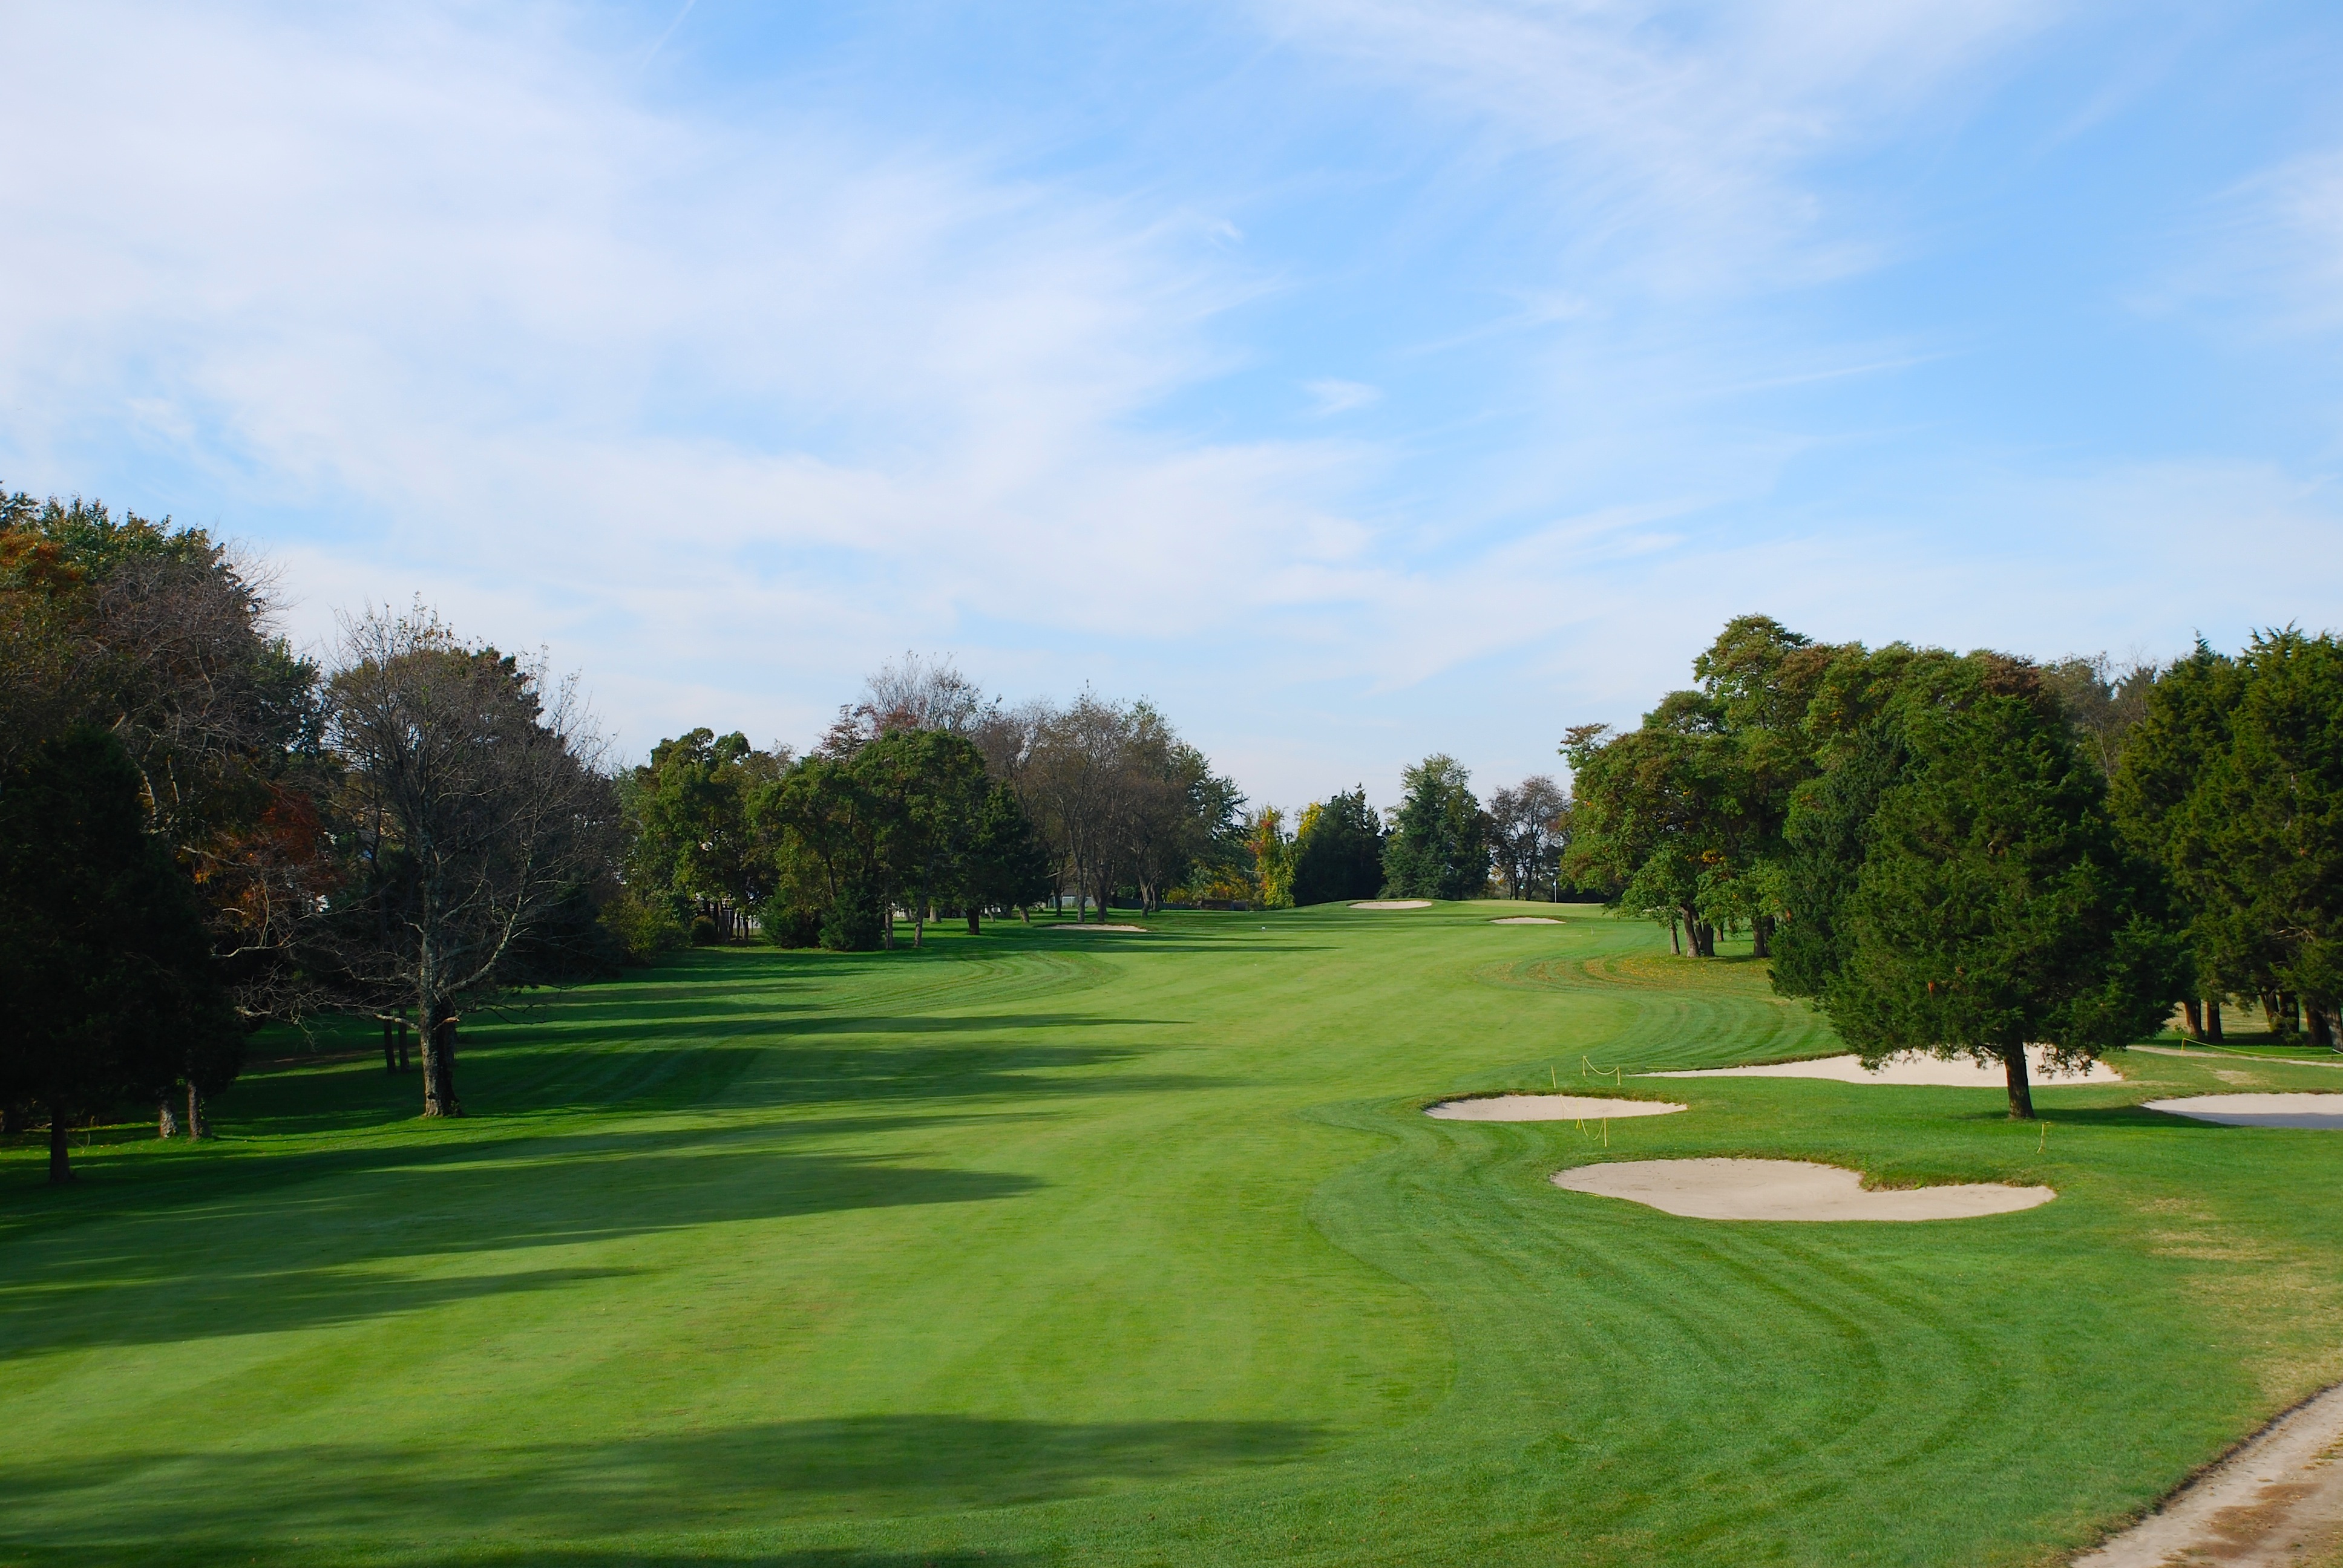 home1 image of golf course with sand traps, trees, and blue sky